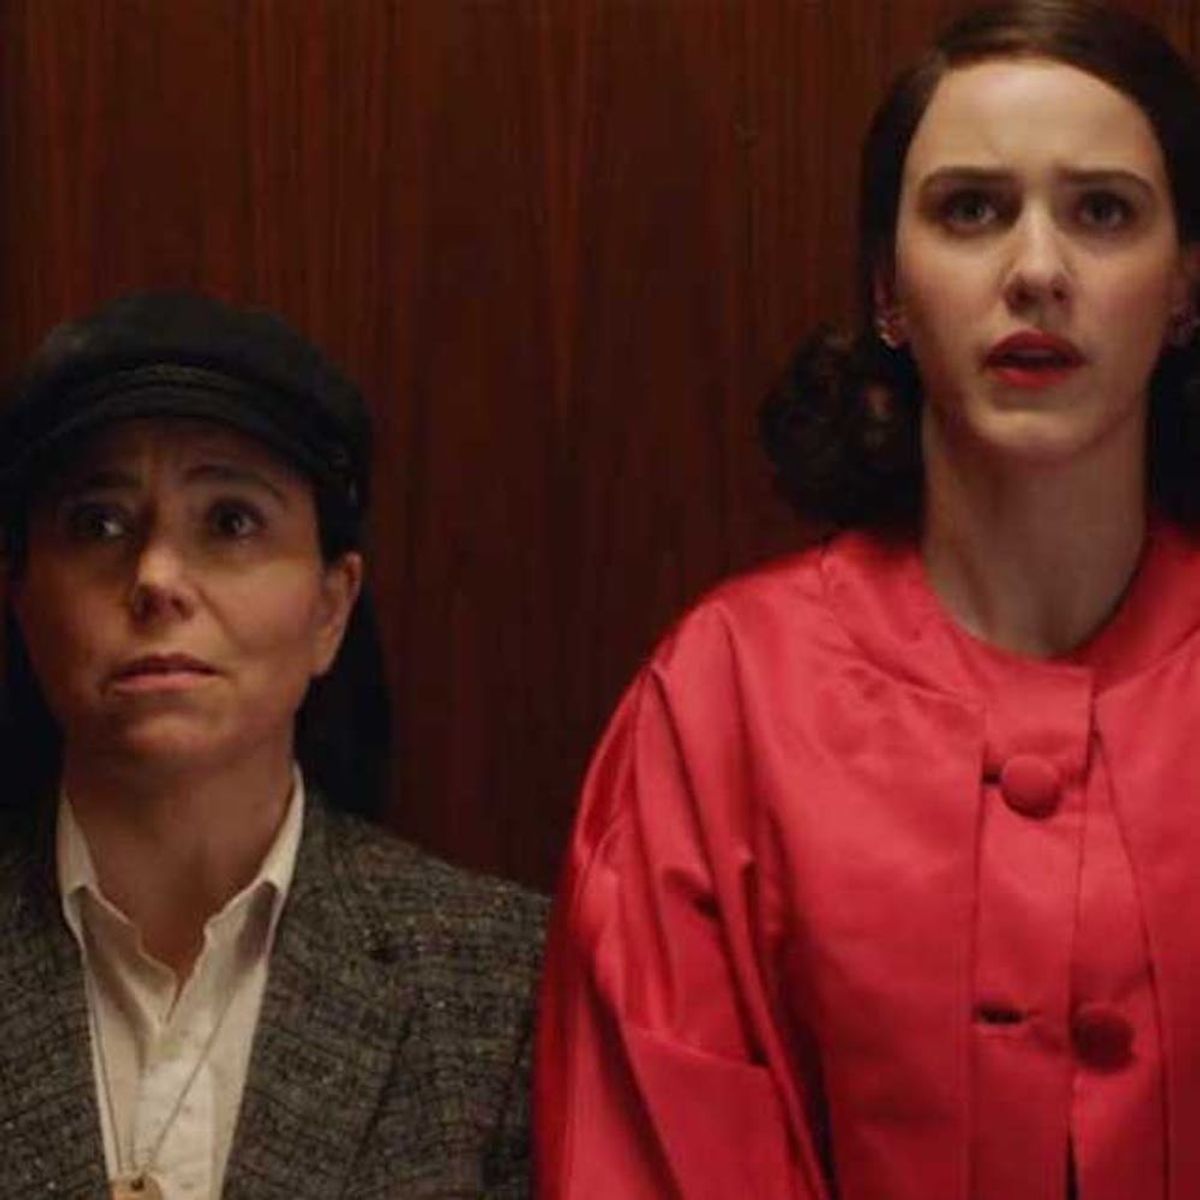 ‘The Marvelous Mrs. Maisel’ Episode 6 Recap: Midge and Susie Are Our New Favorite Pair